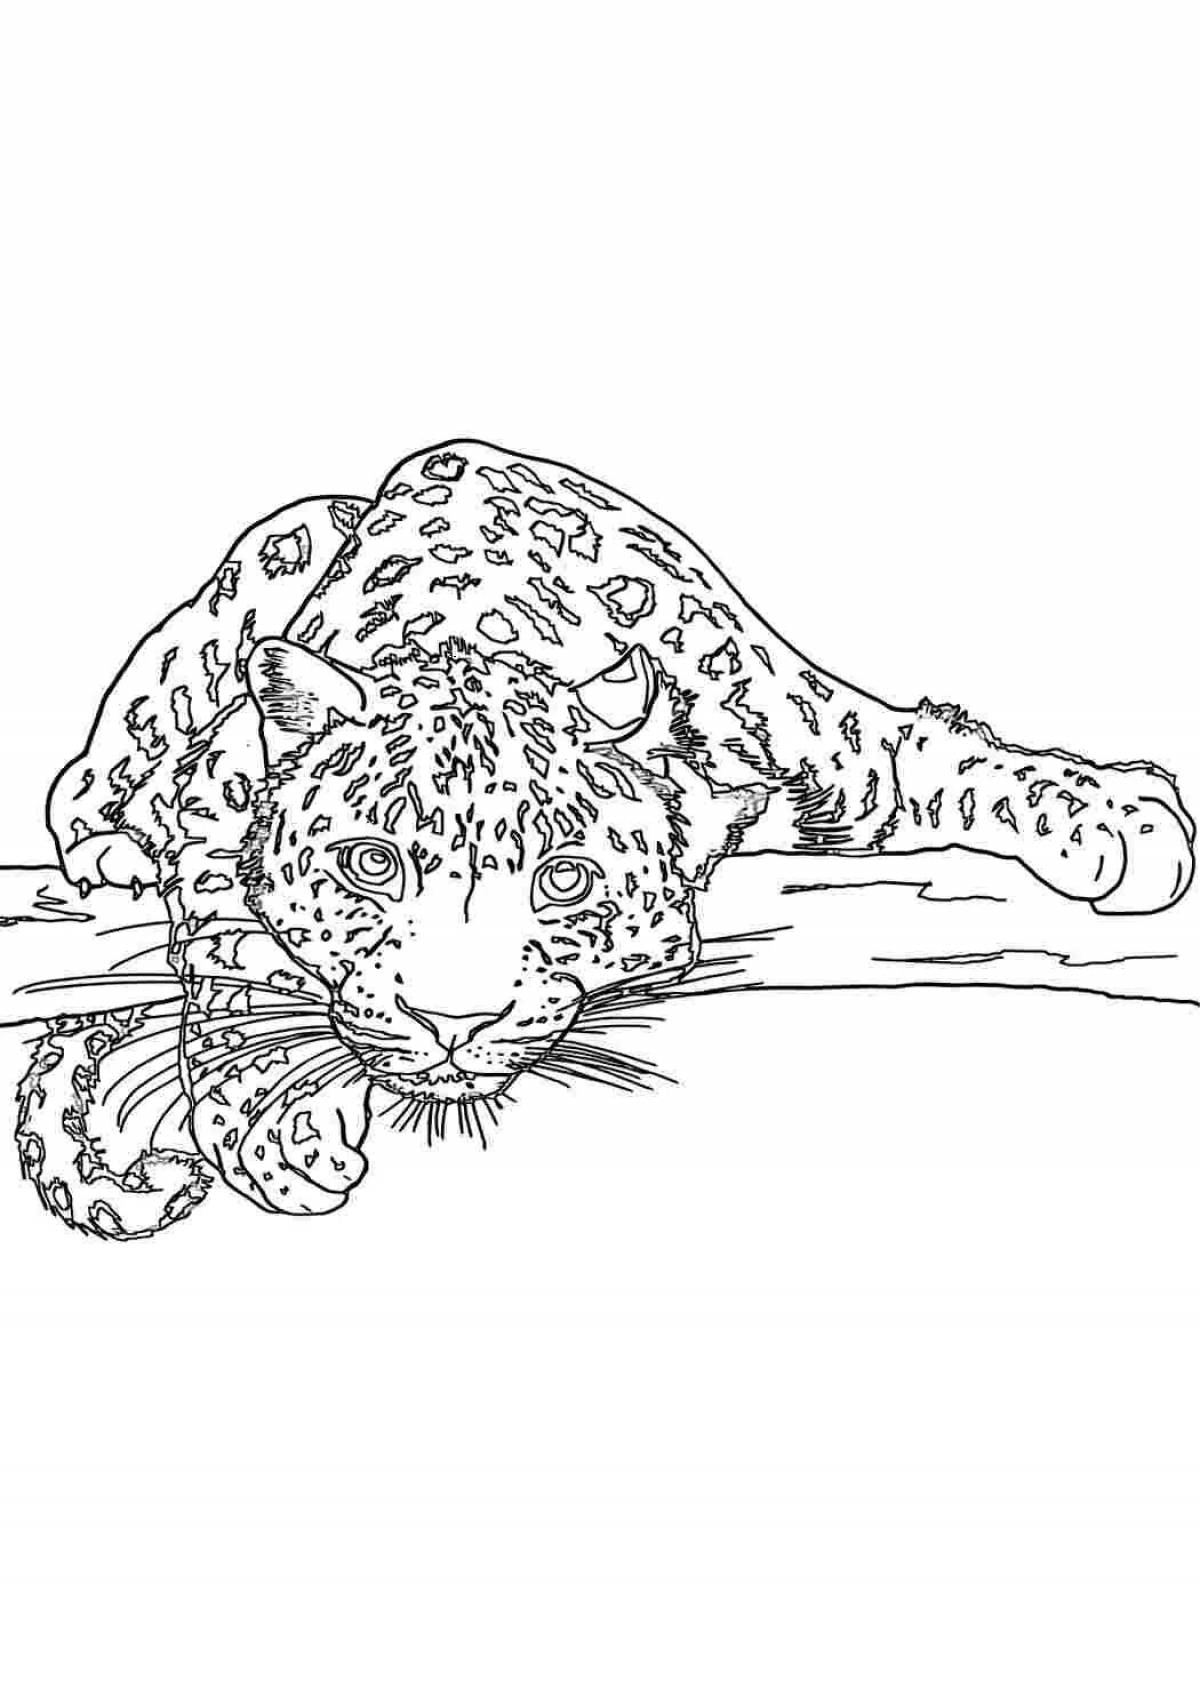 A funny snow leopard coloring book